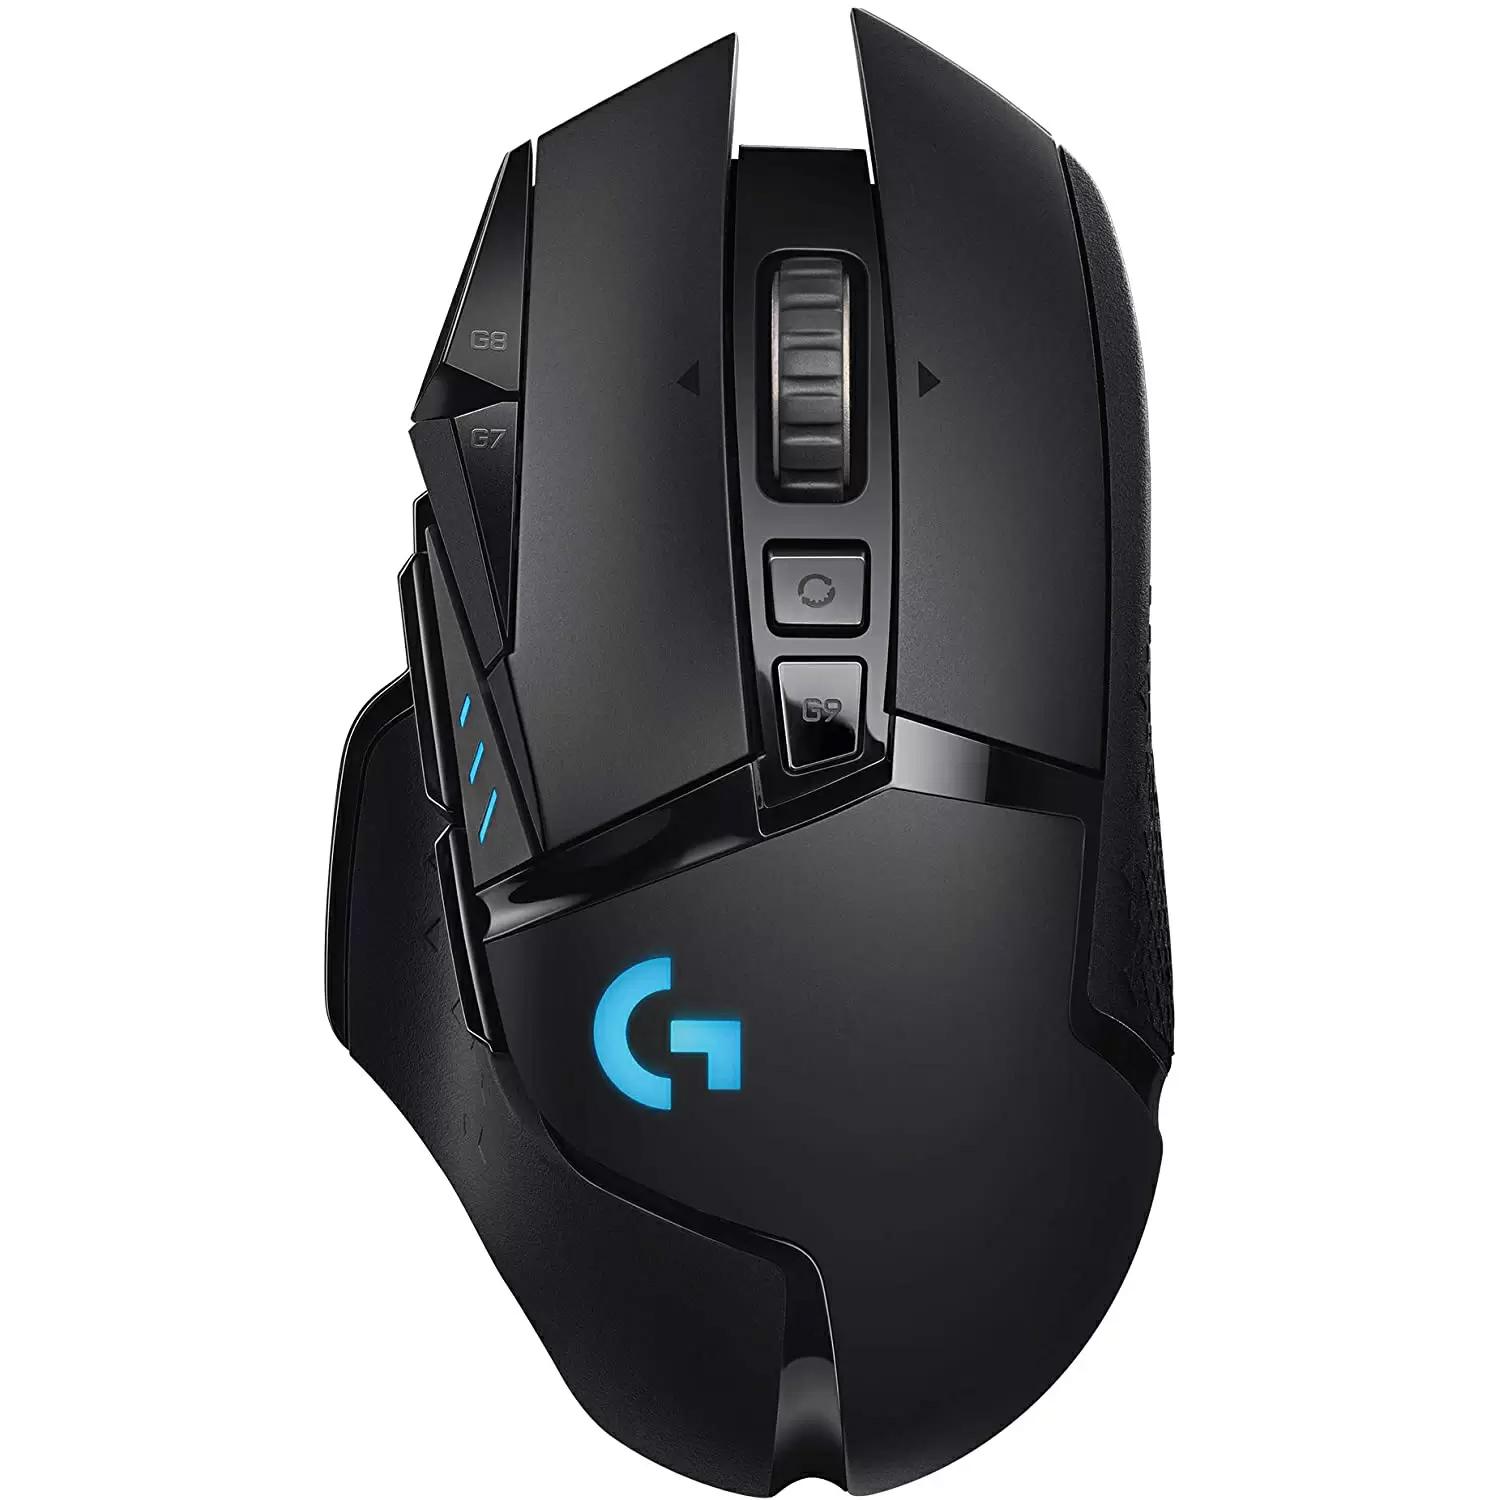 Logitech G502 HERO Wireless Gaming Mouse with Lightsync RGB for $39.99 Shipped